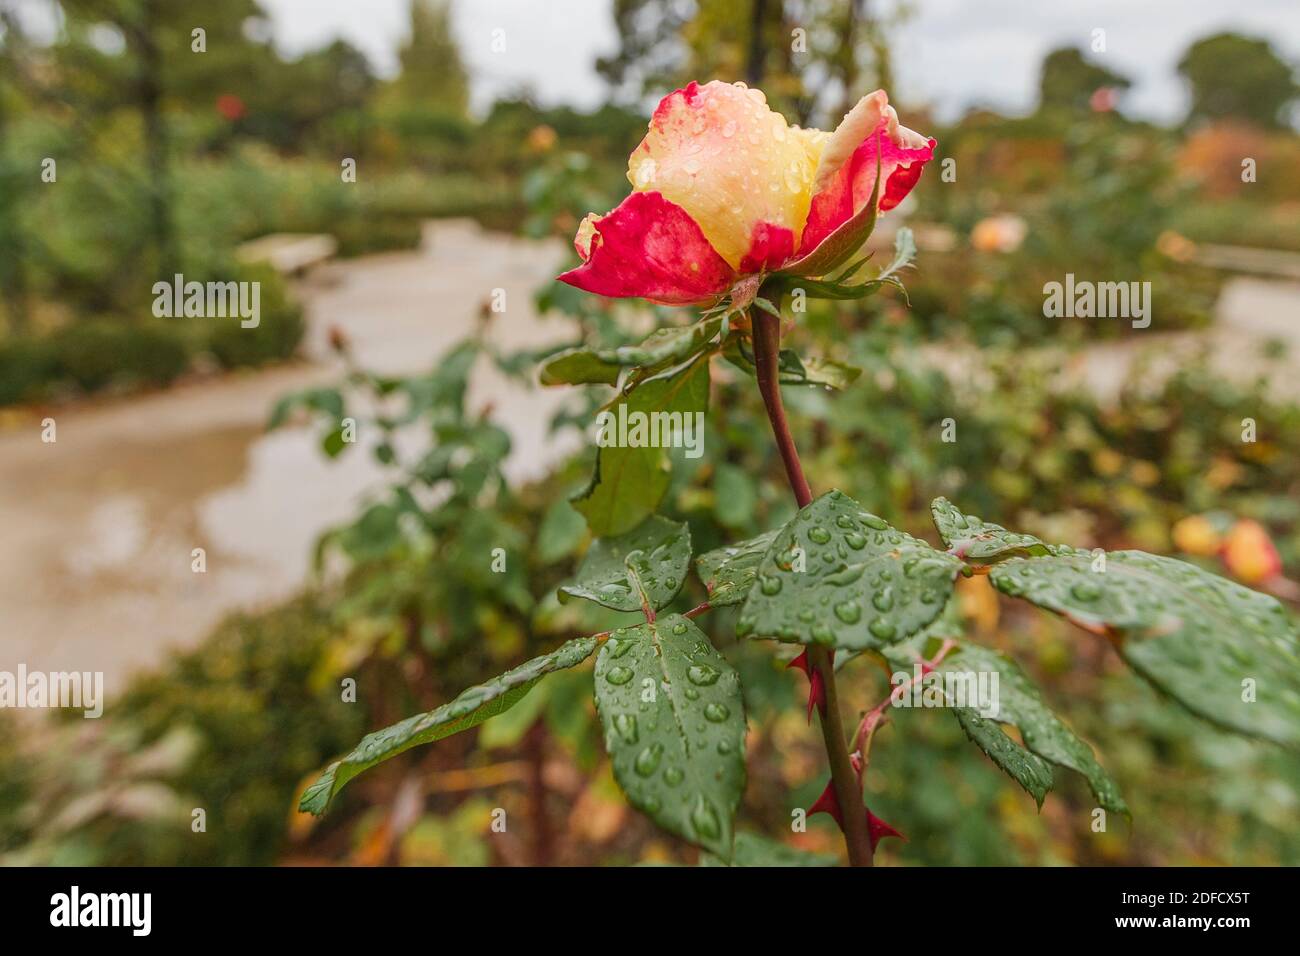 Detail of natural garden rose with raindrops on an autumn day. Stock Photo